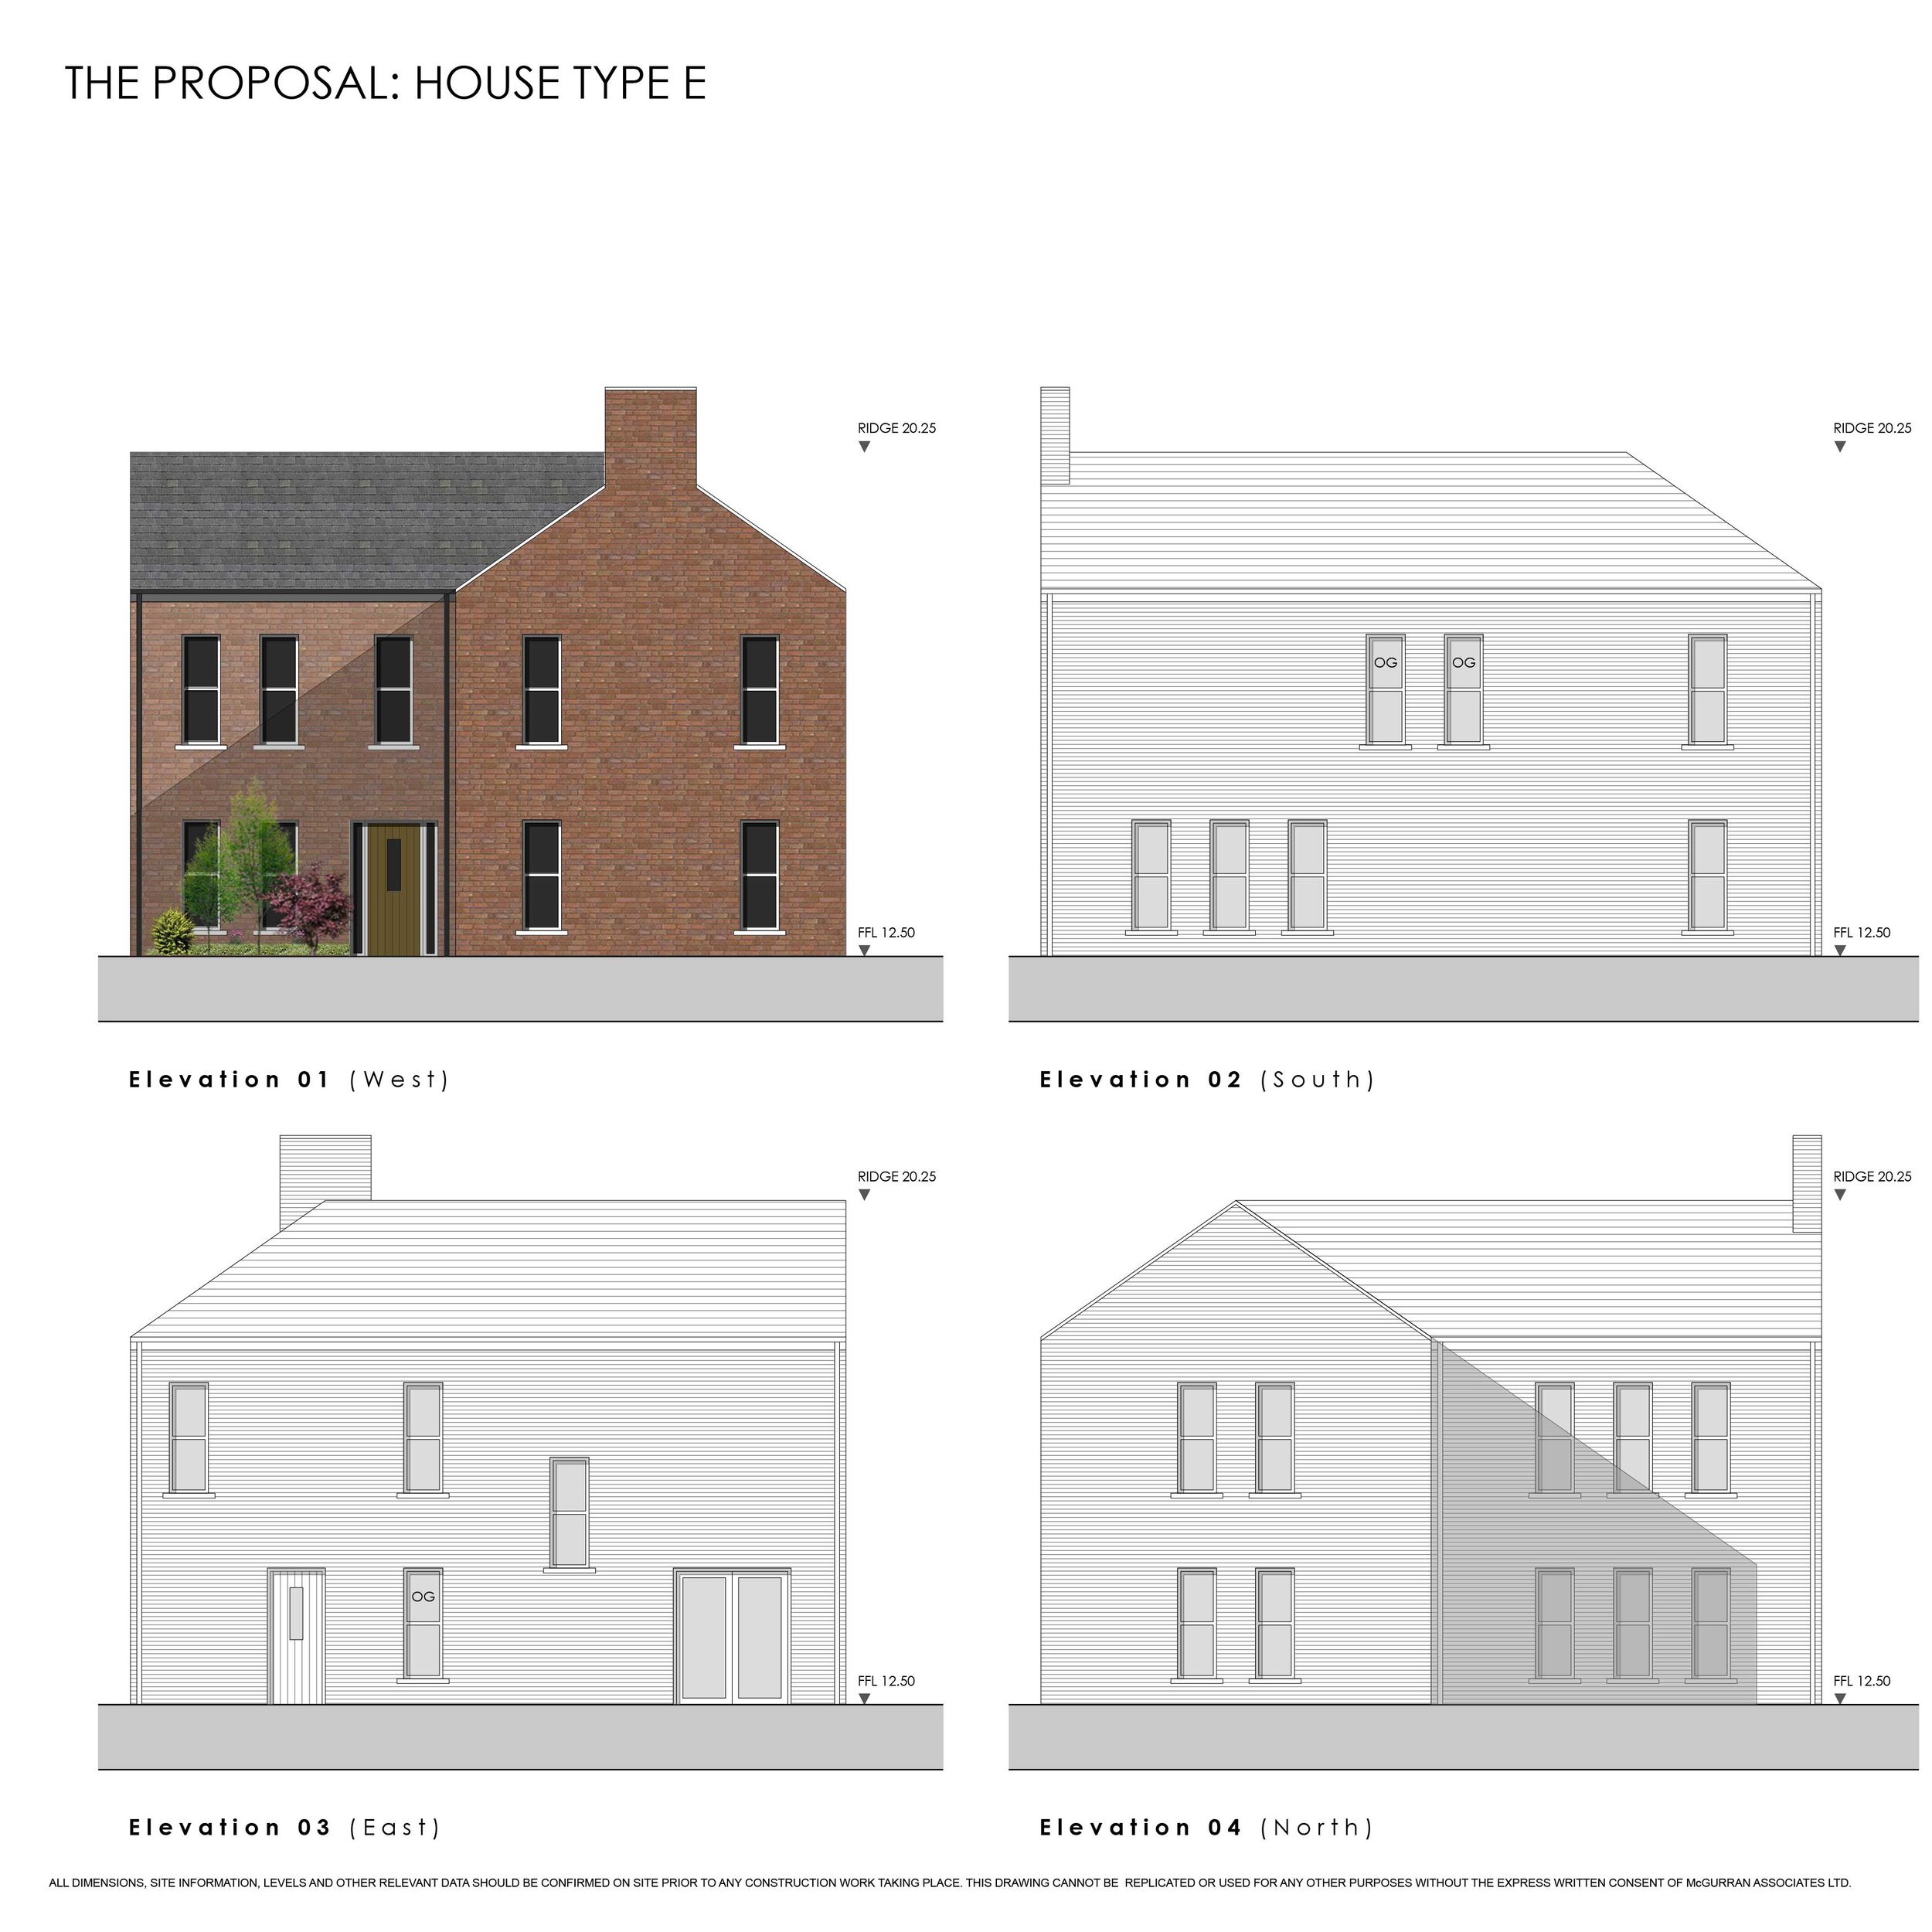 18-104-P19-Proposed-House-Type-E-Elevations.jpg